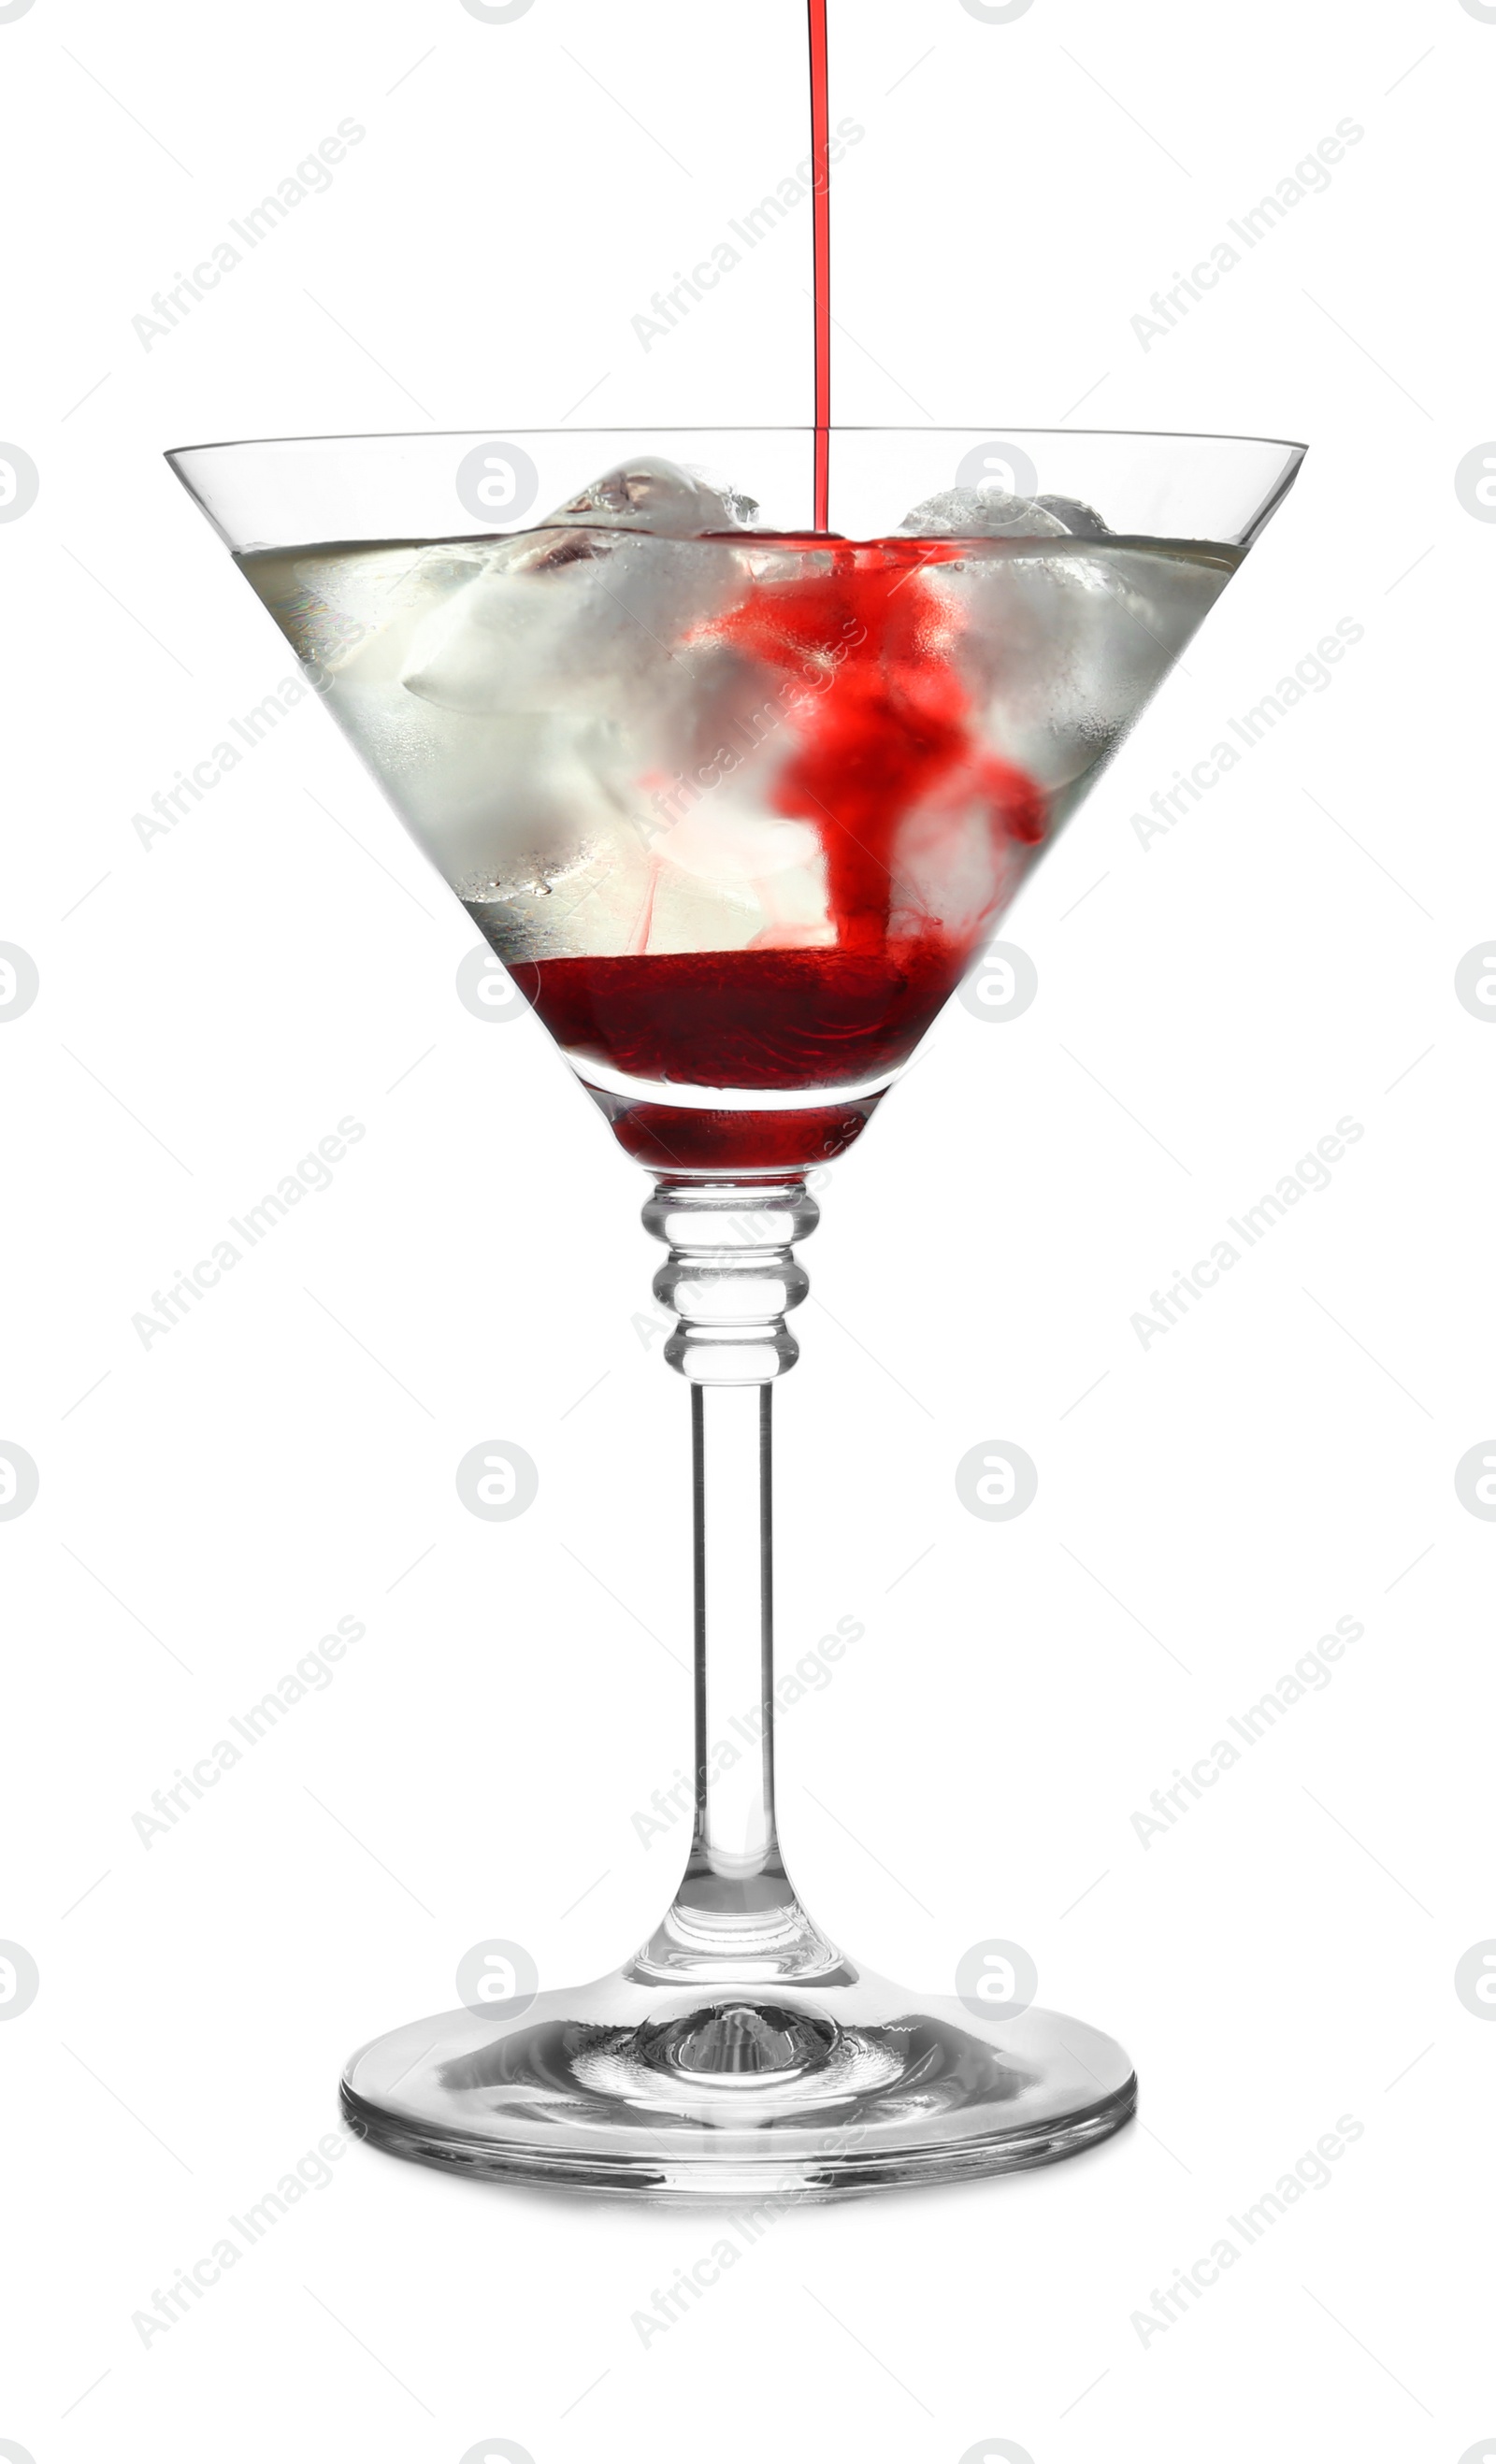 Photo of Pouring grenadine into glass of martini cocktail on white background